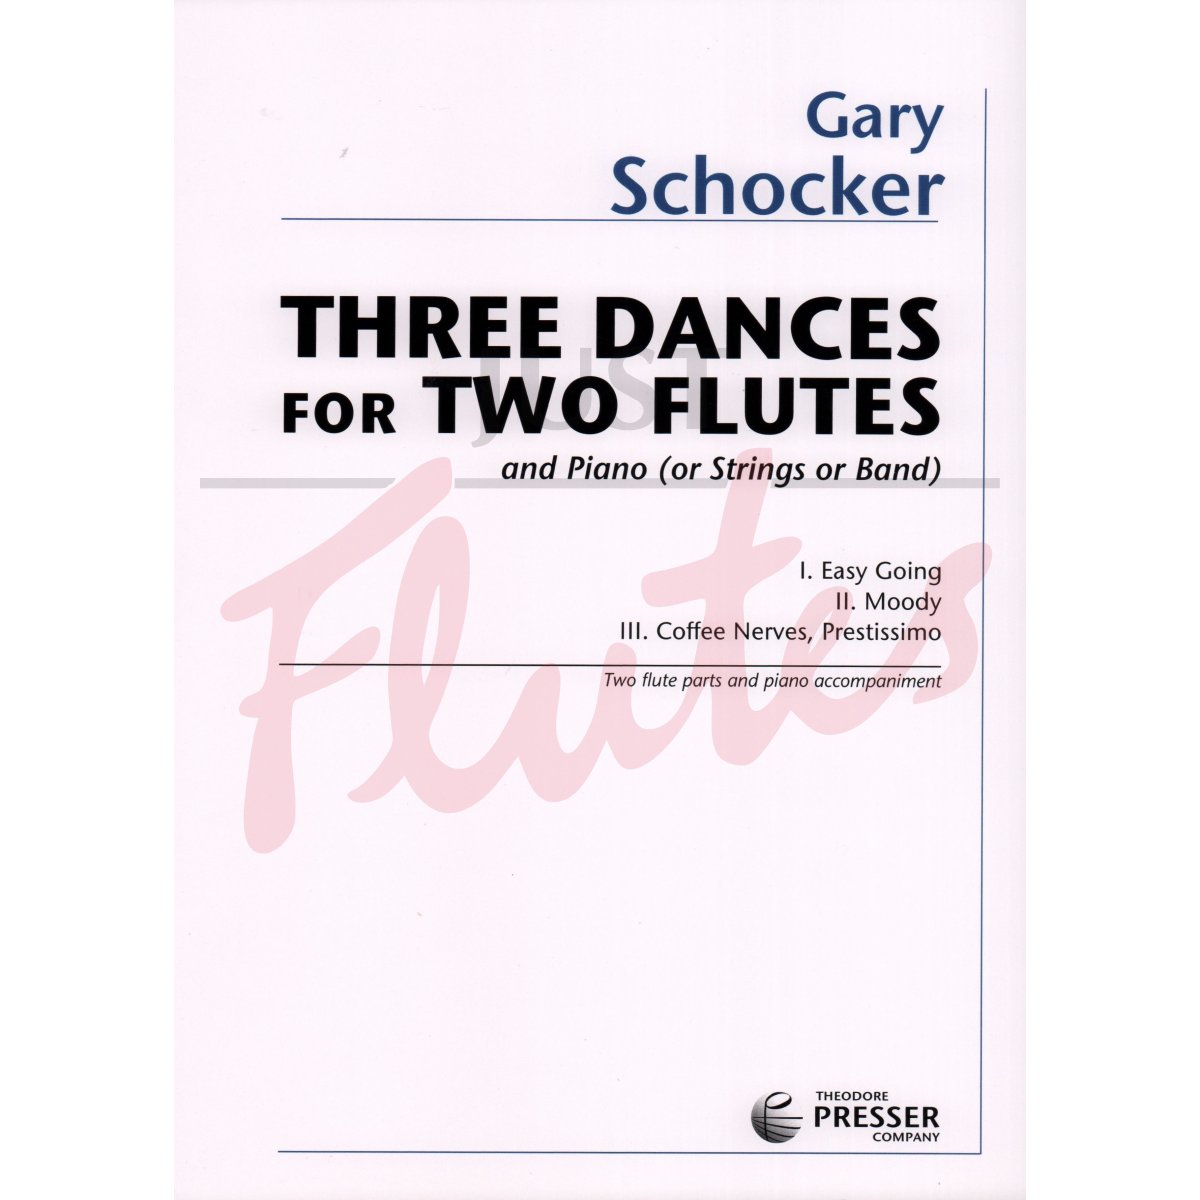 Three Dances for Two Flutes and Piano